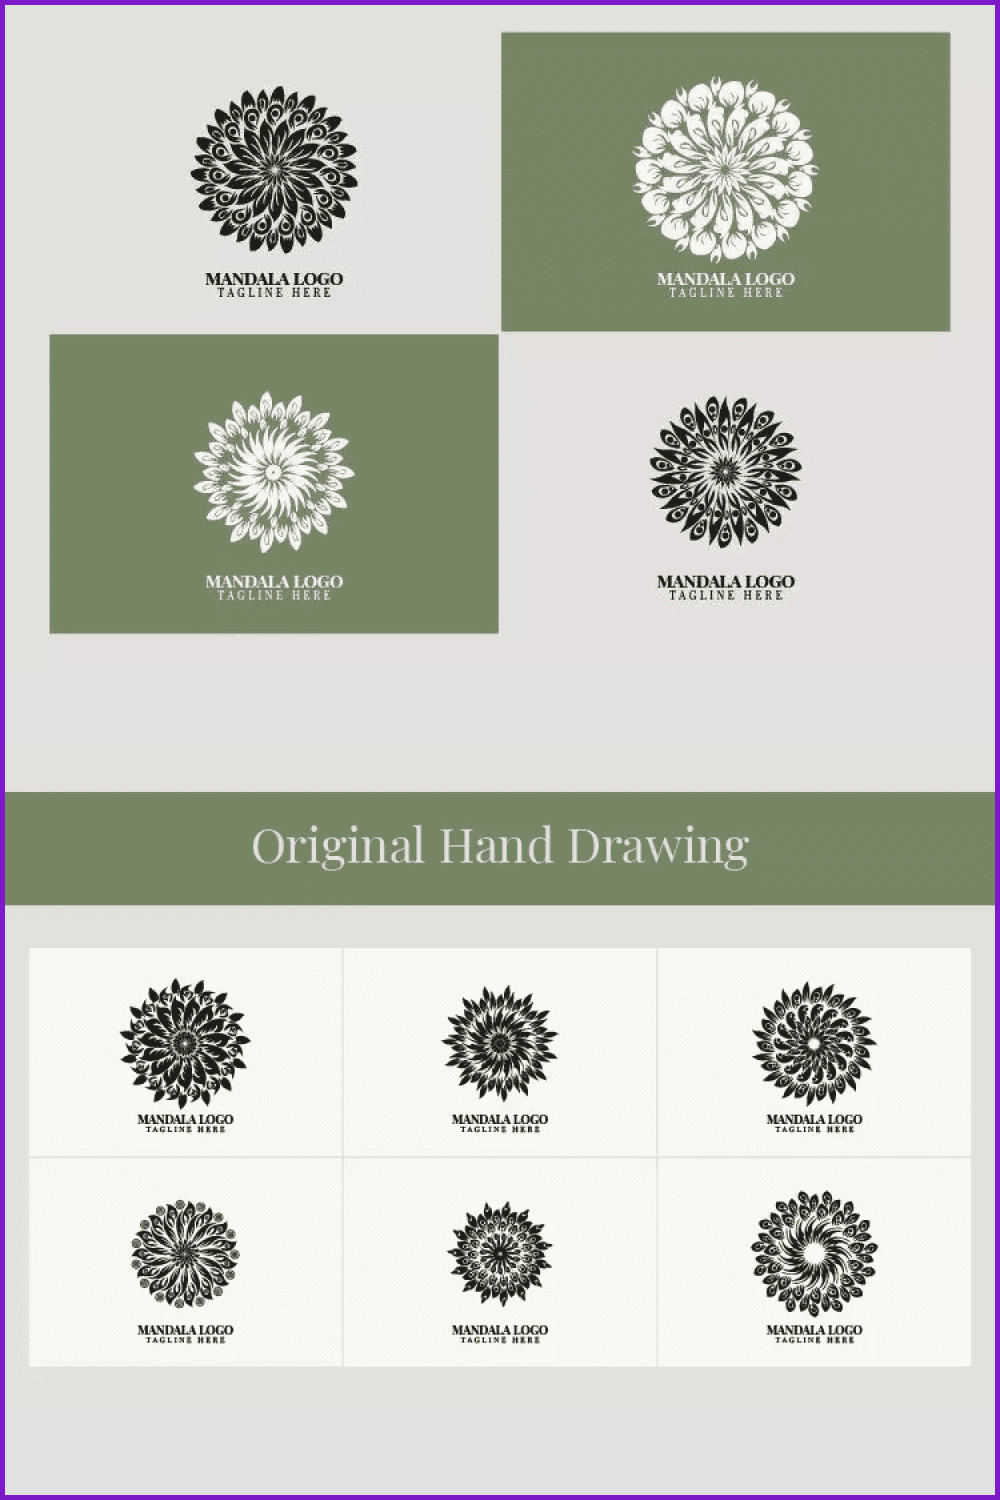 Modern execution of the mandala. Here are some options for your logo.